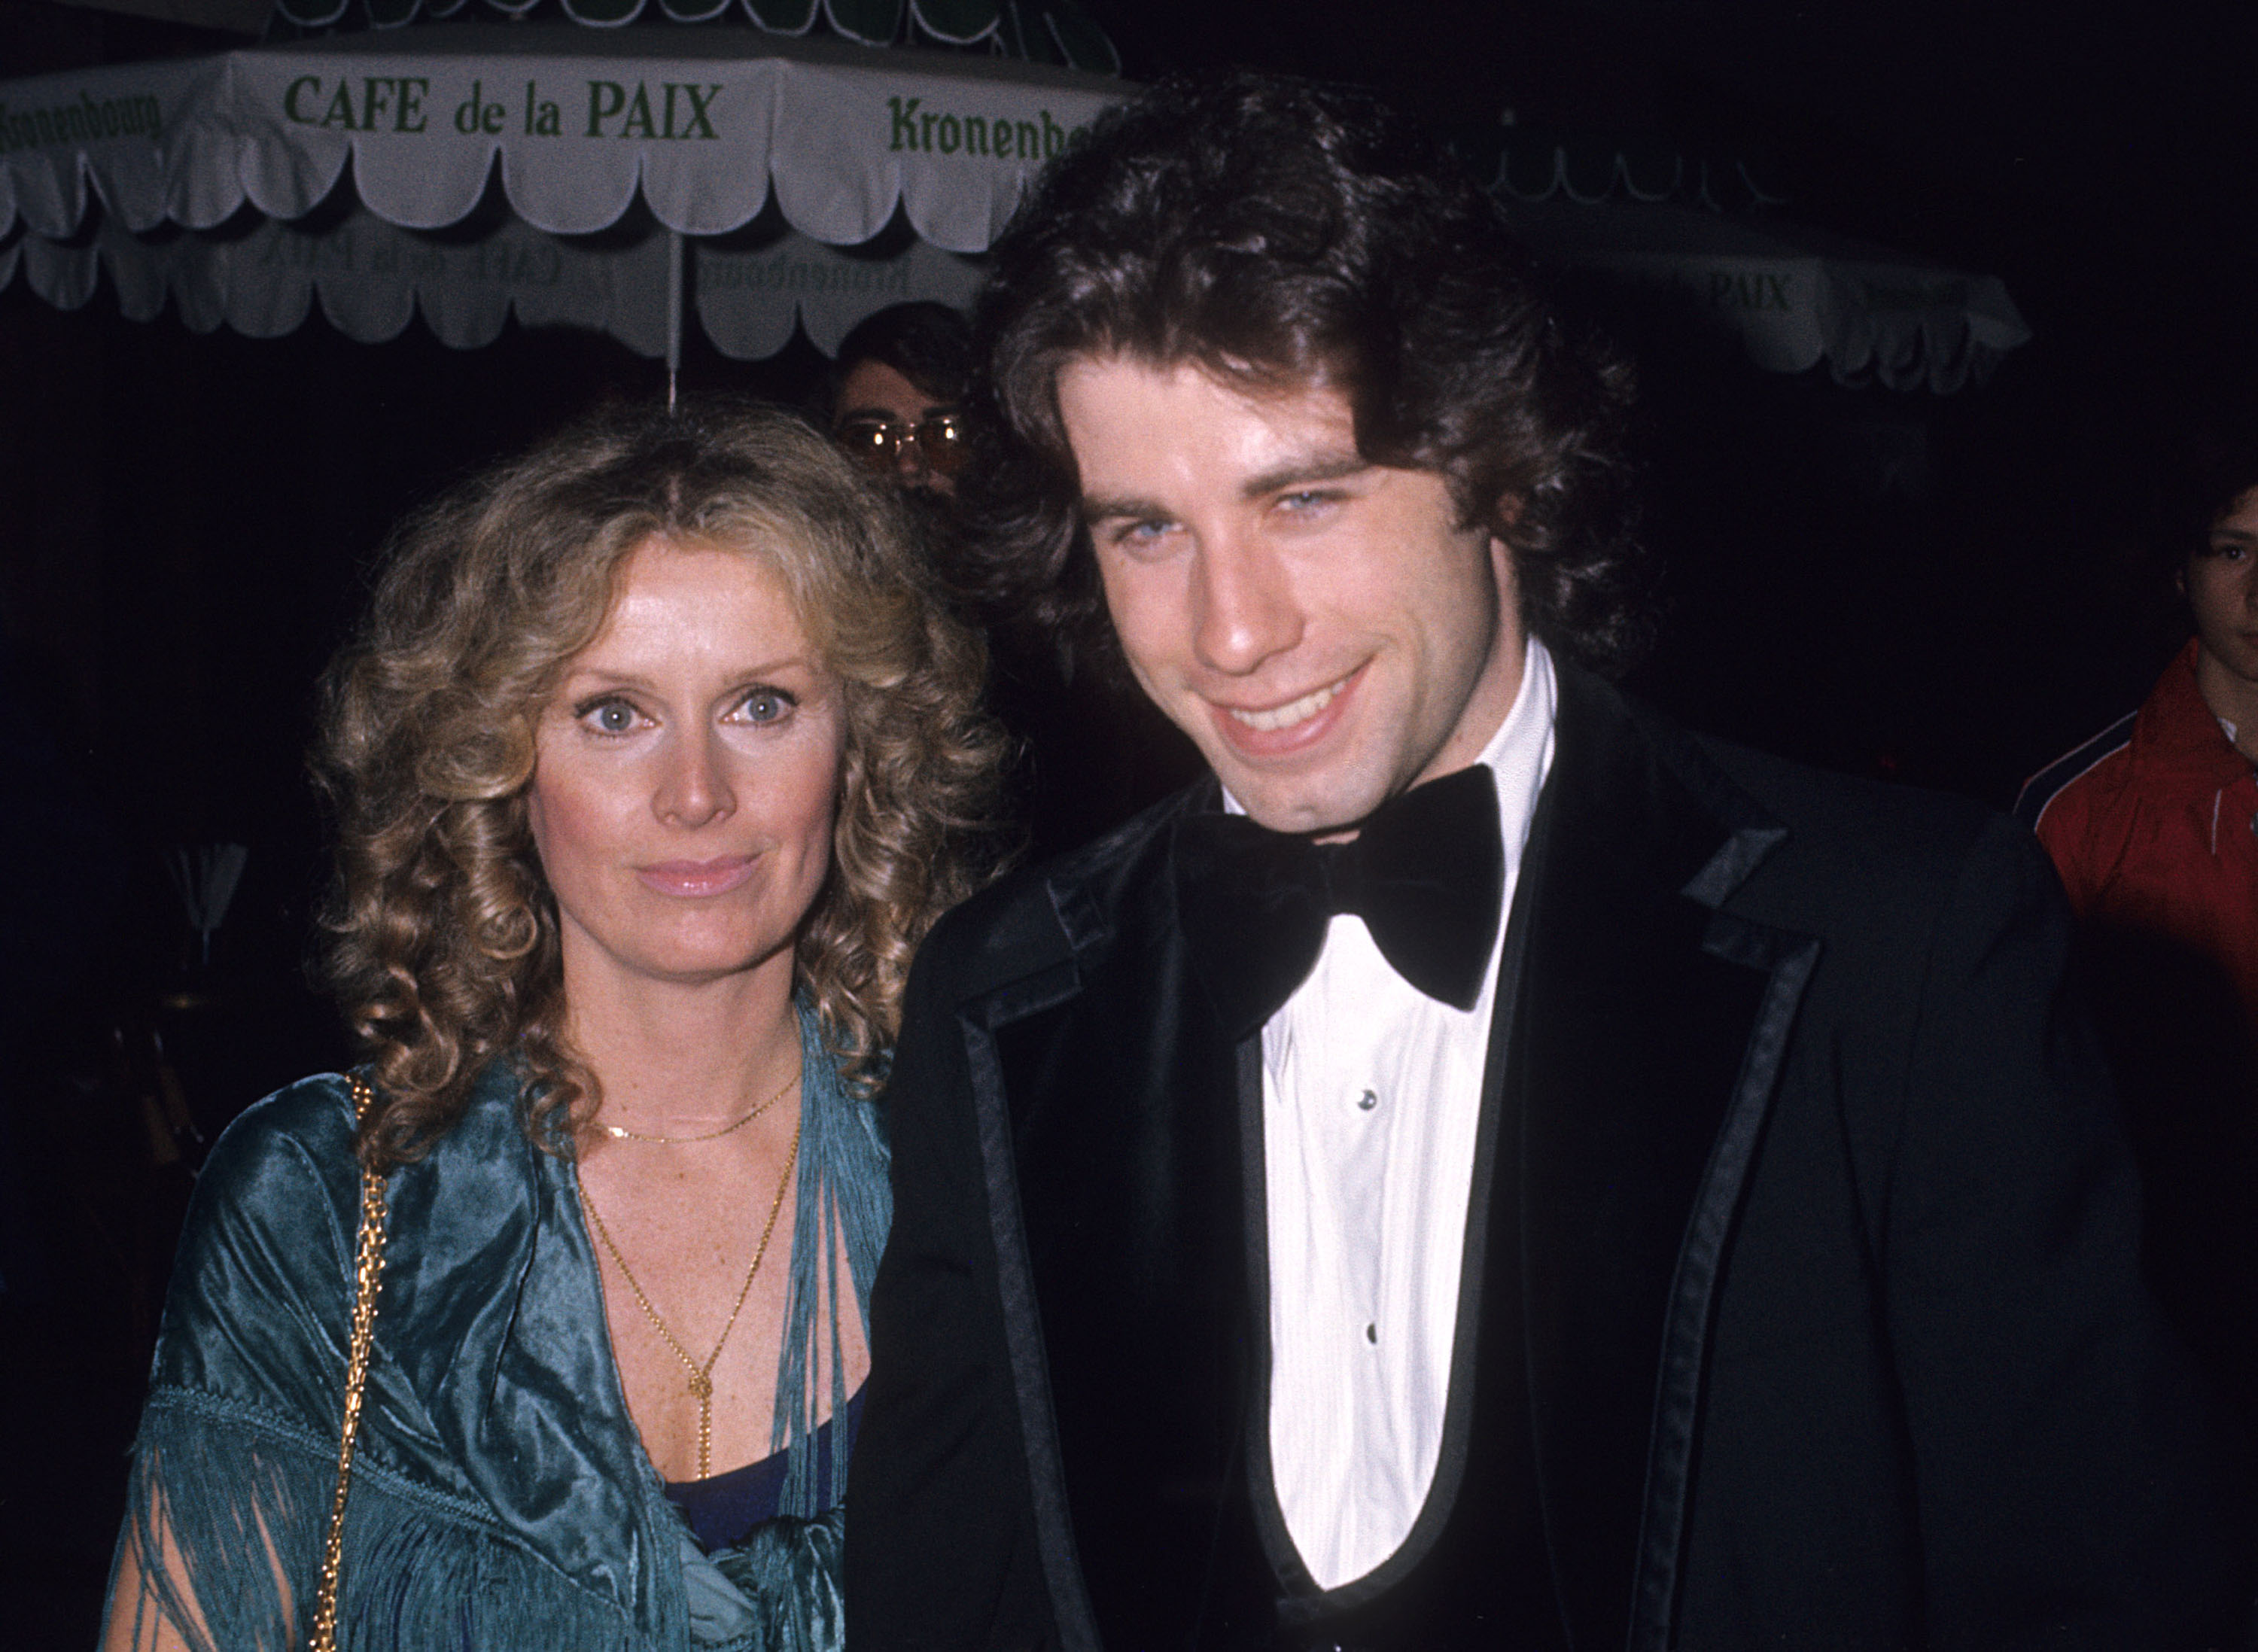 Diana Hyland and John Travolta at an event in Los Angeles, California on December 8, 1976 | Source: Getty Images